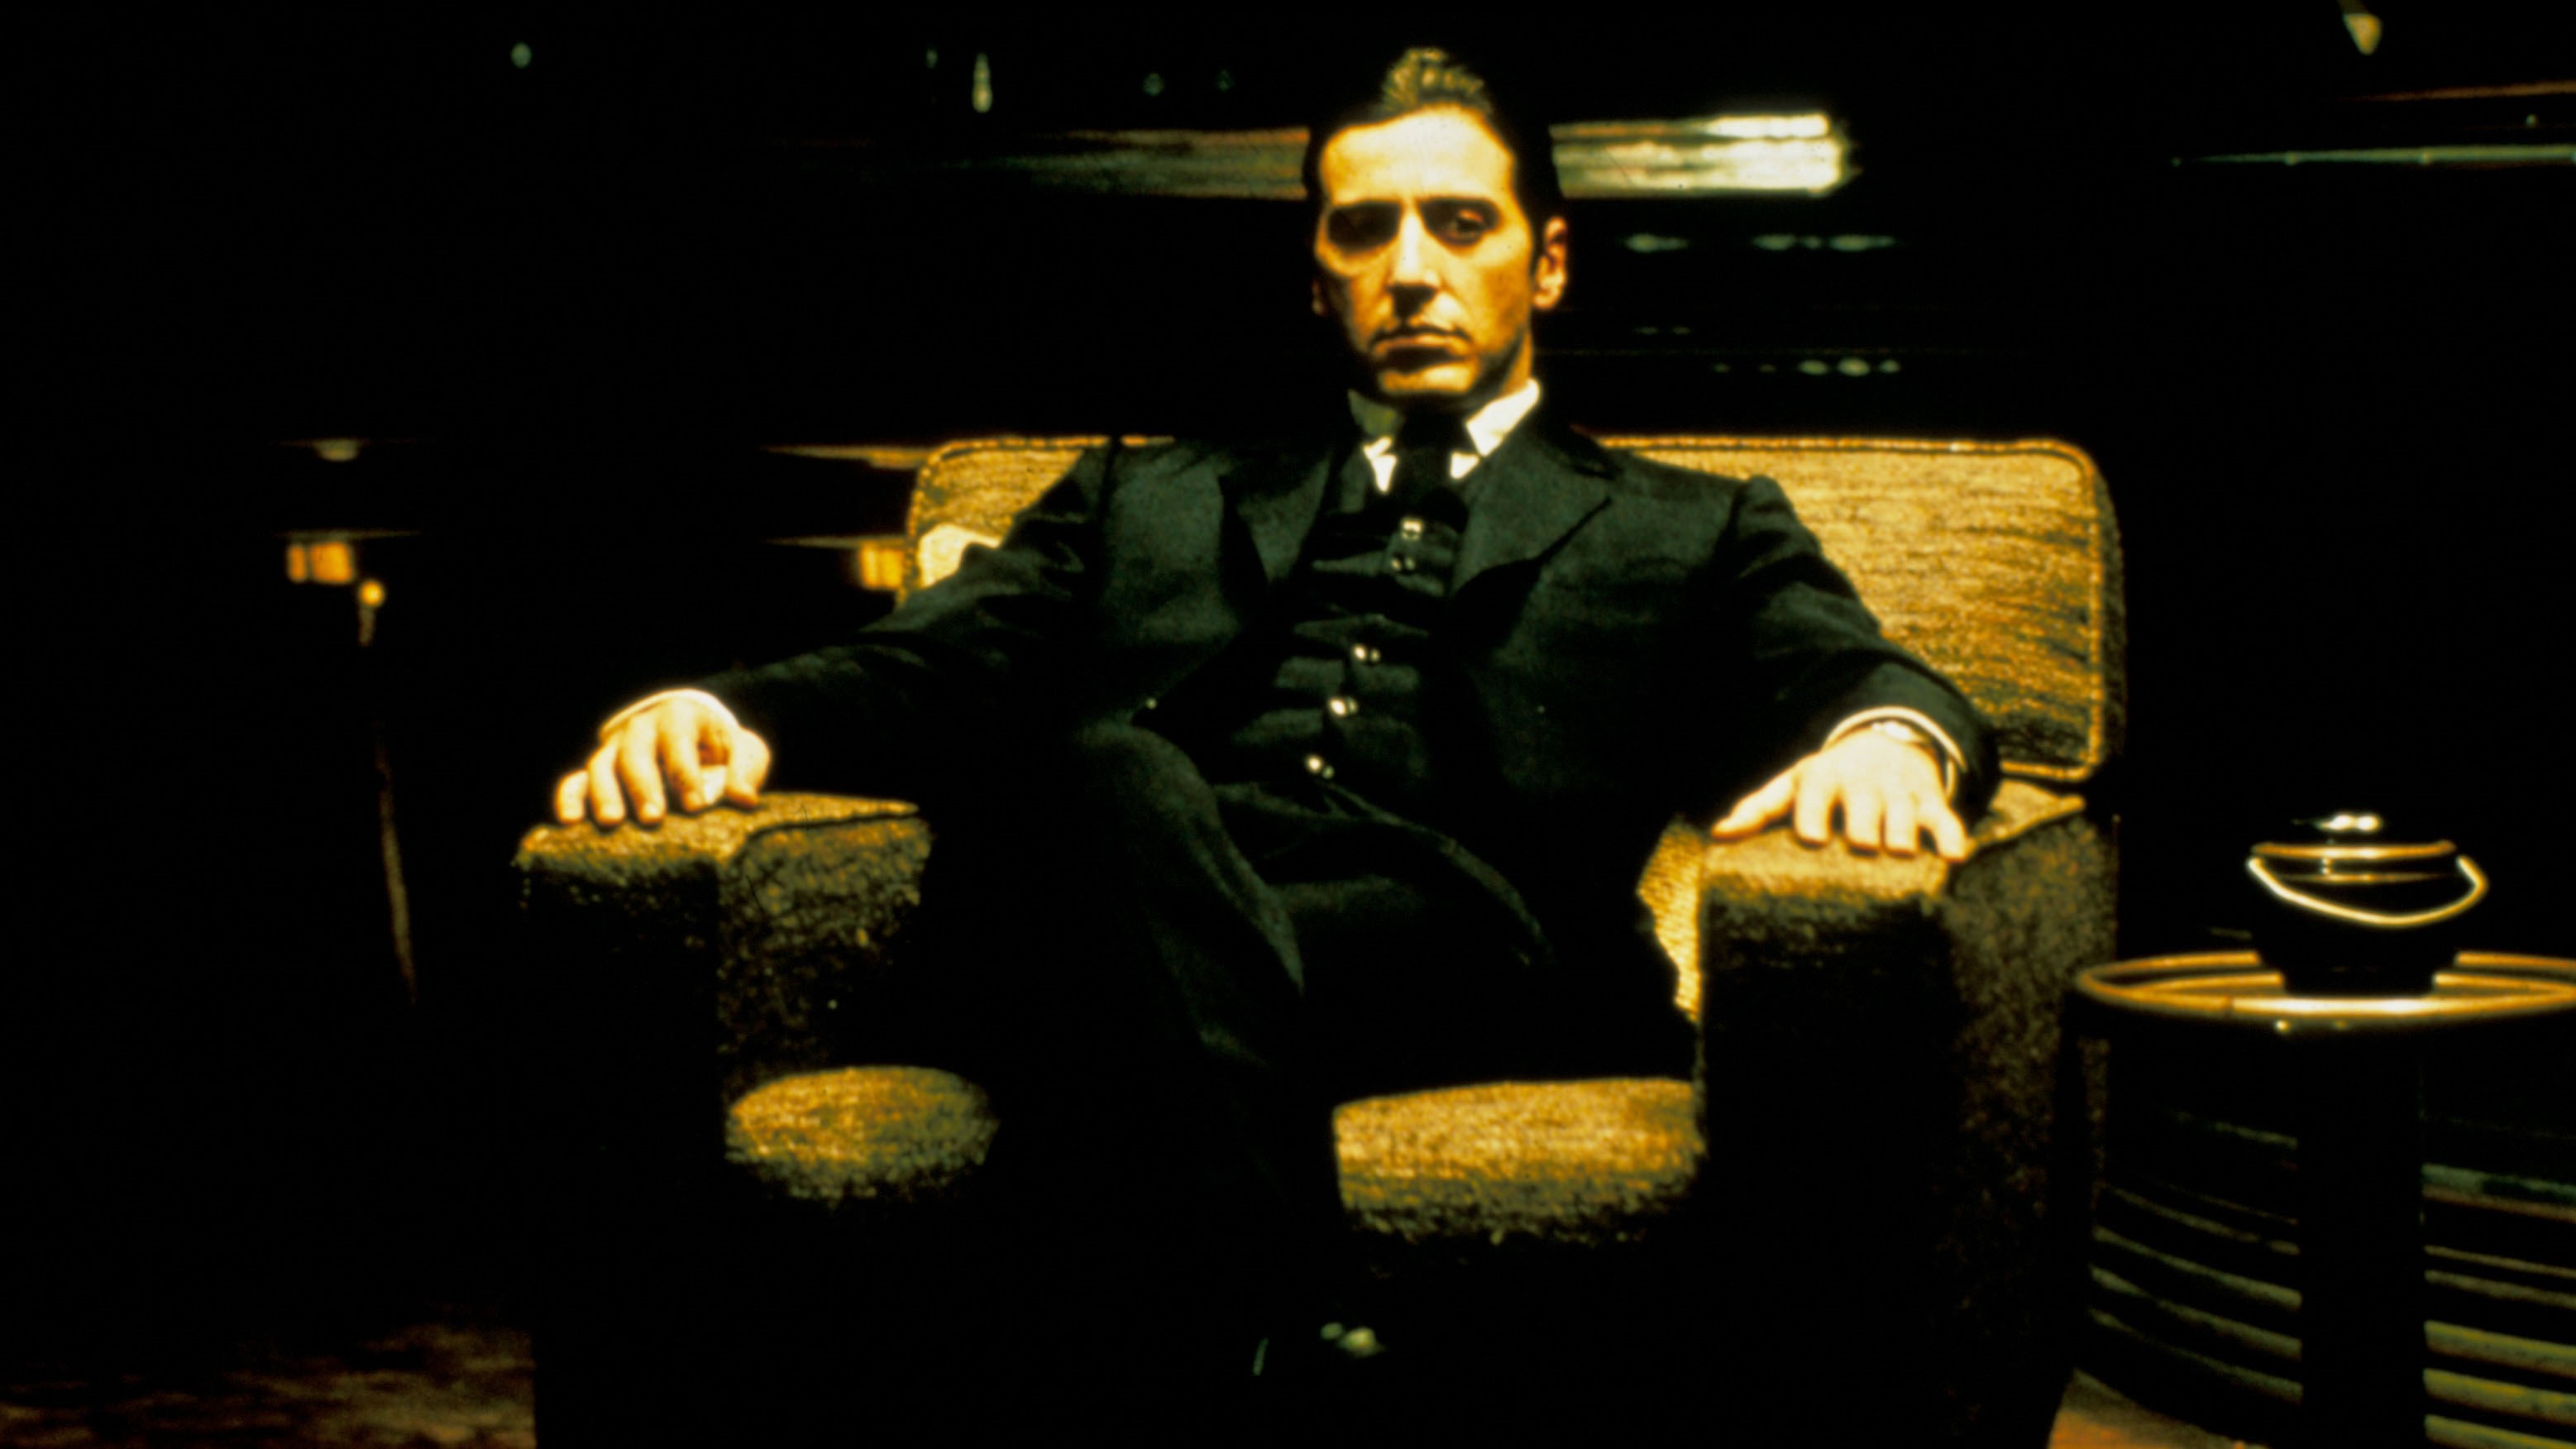 Al Pacino sitting in a chair in The Godfather Part II